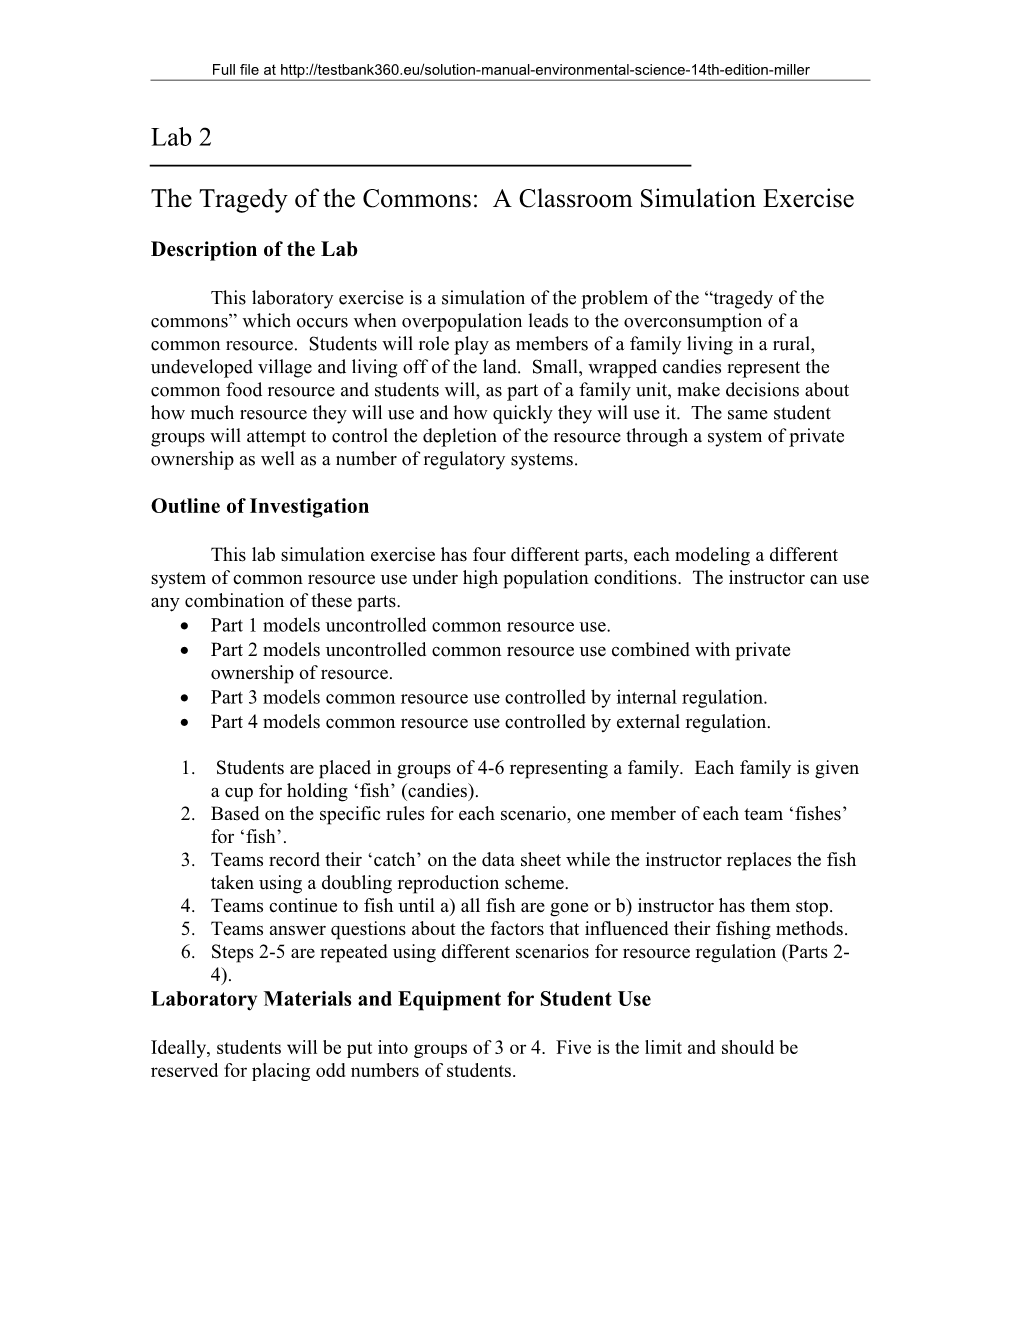 The Tragedy of the Commons: a Classroom Simulation Exercise